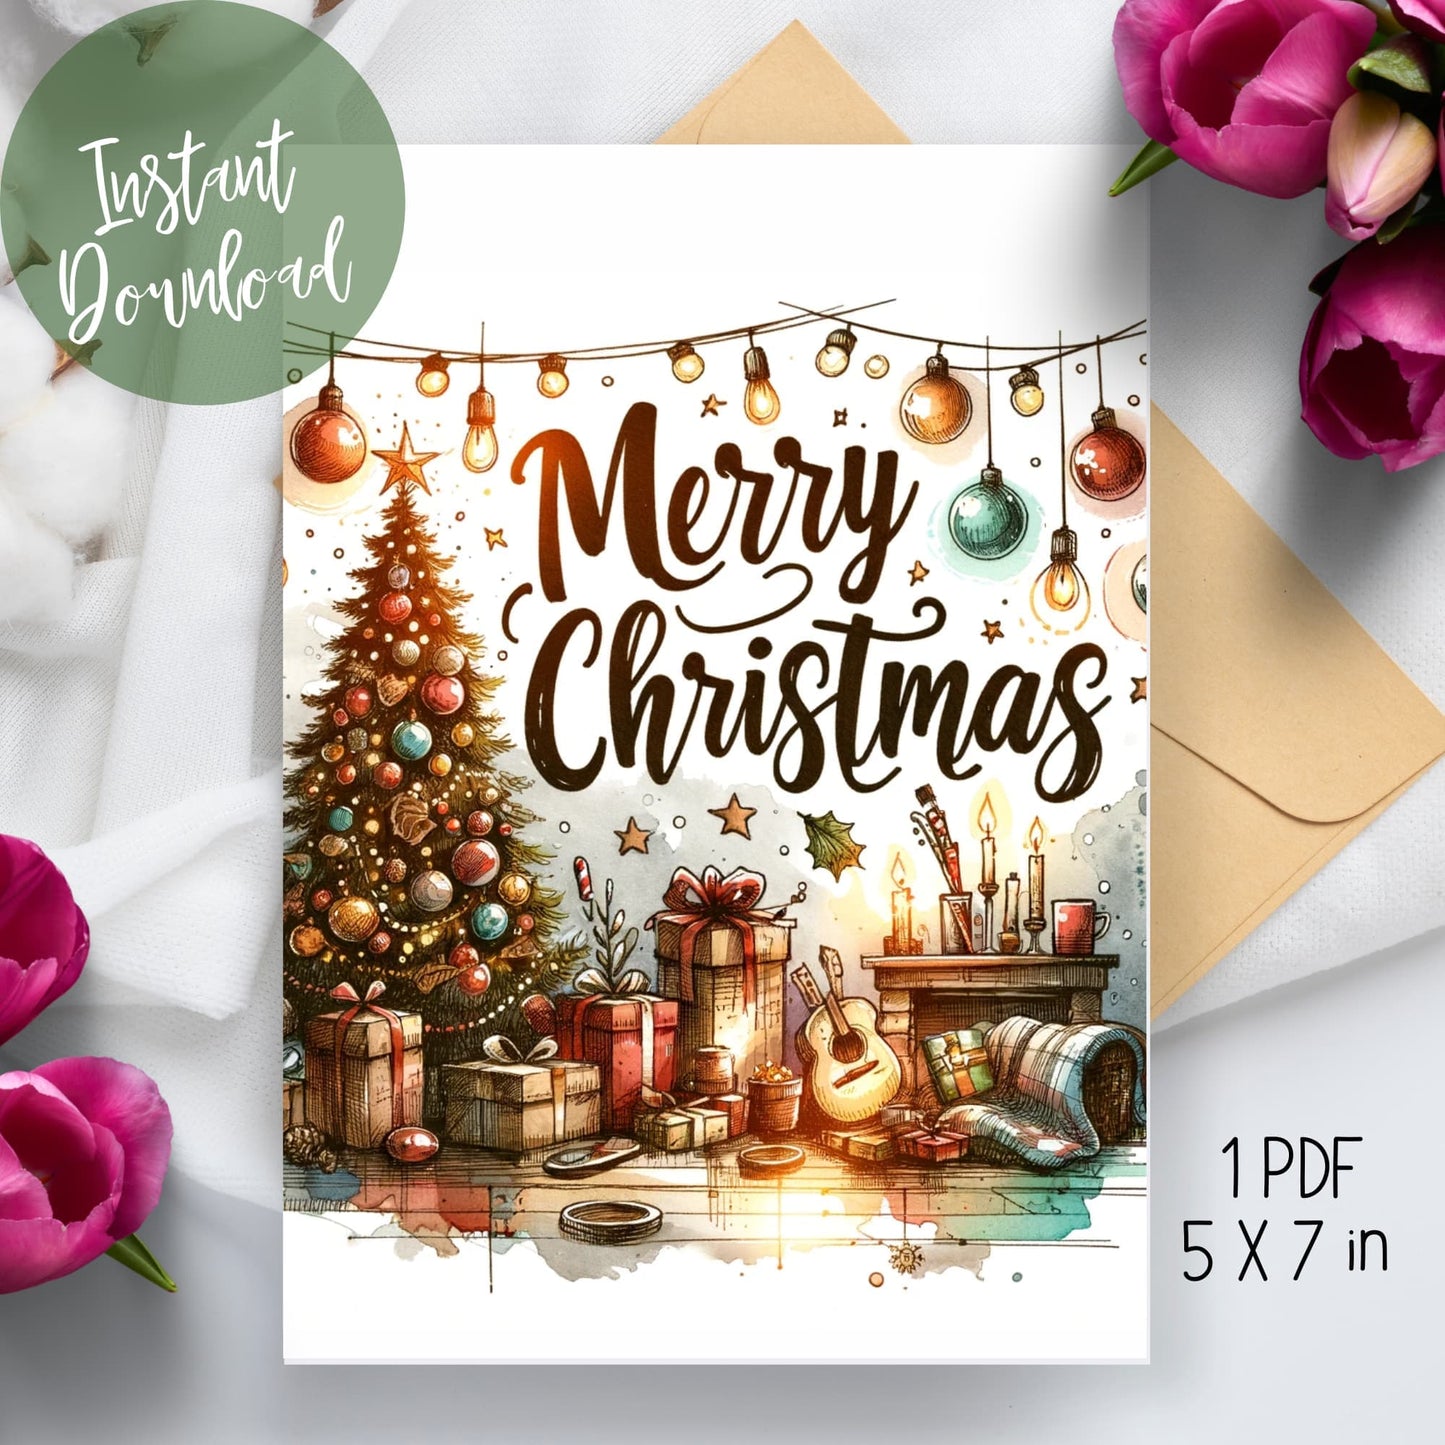 2023 Merry Christmas Greeting Card Printable featuring a warm living room scene, elegantly displayed on a table with an envelope and flowers, embodying the comfort and joy of the holiday season.